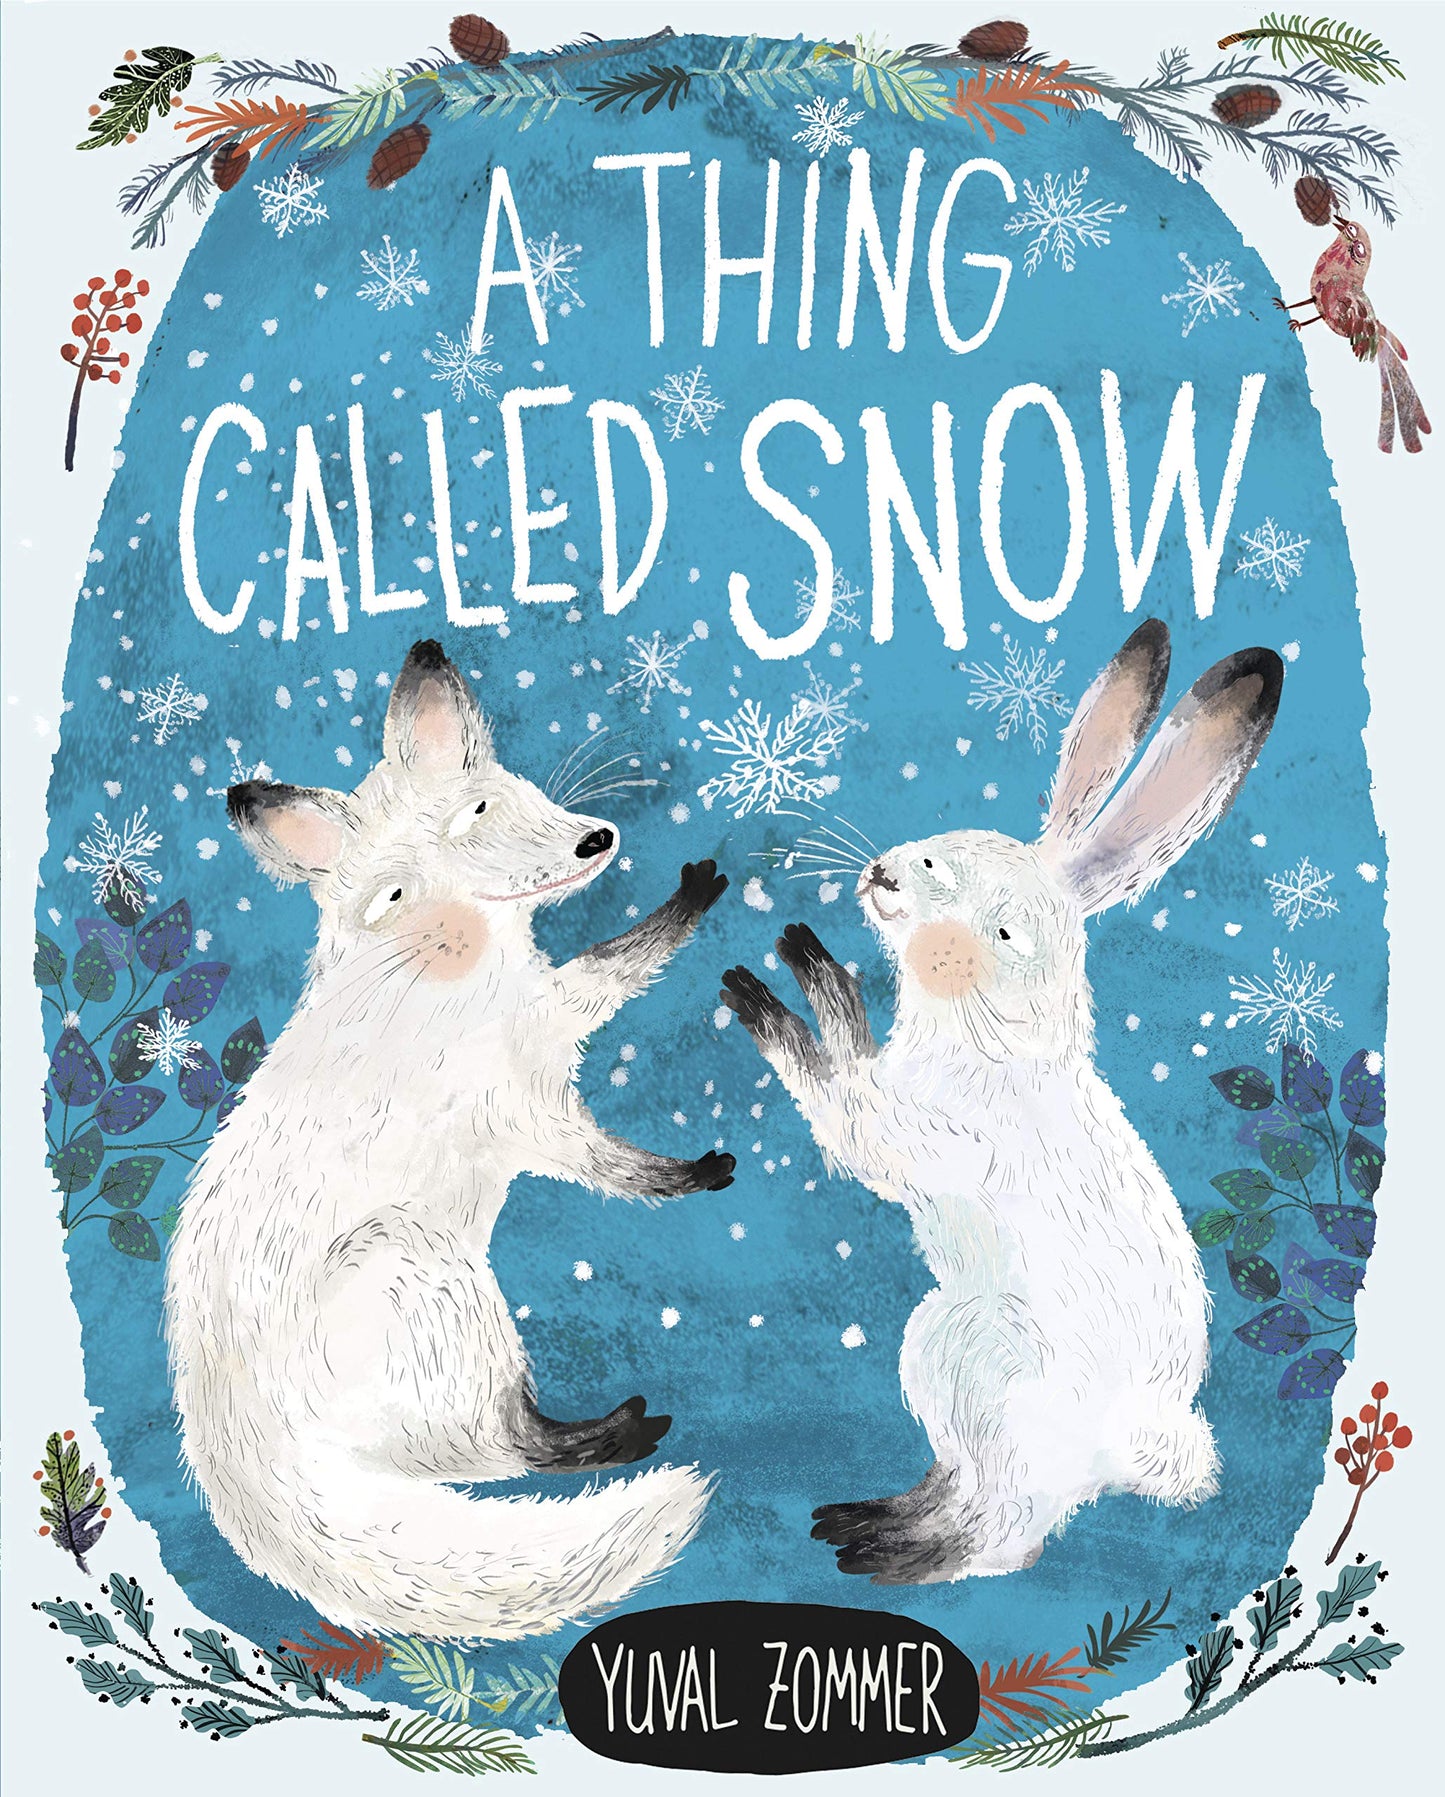 A Thing Called Snow - Yuval Zommer